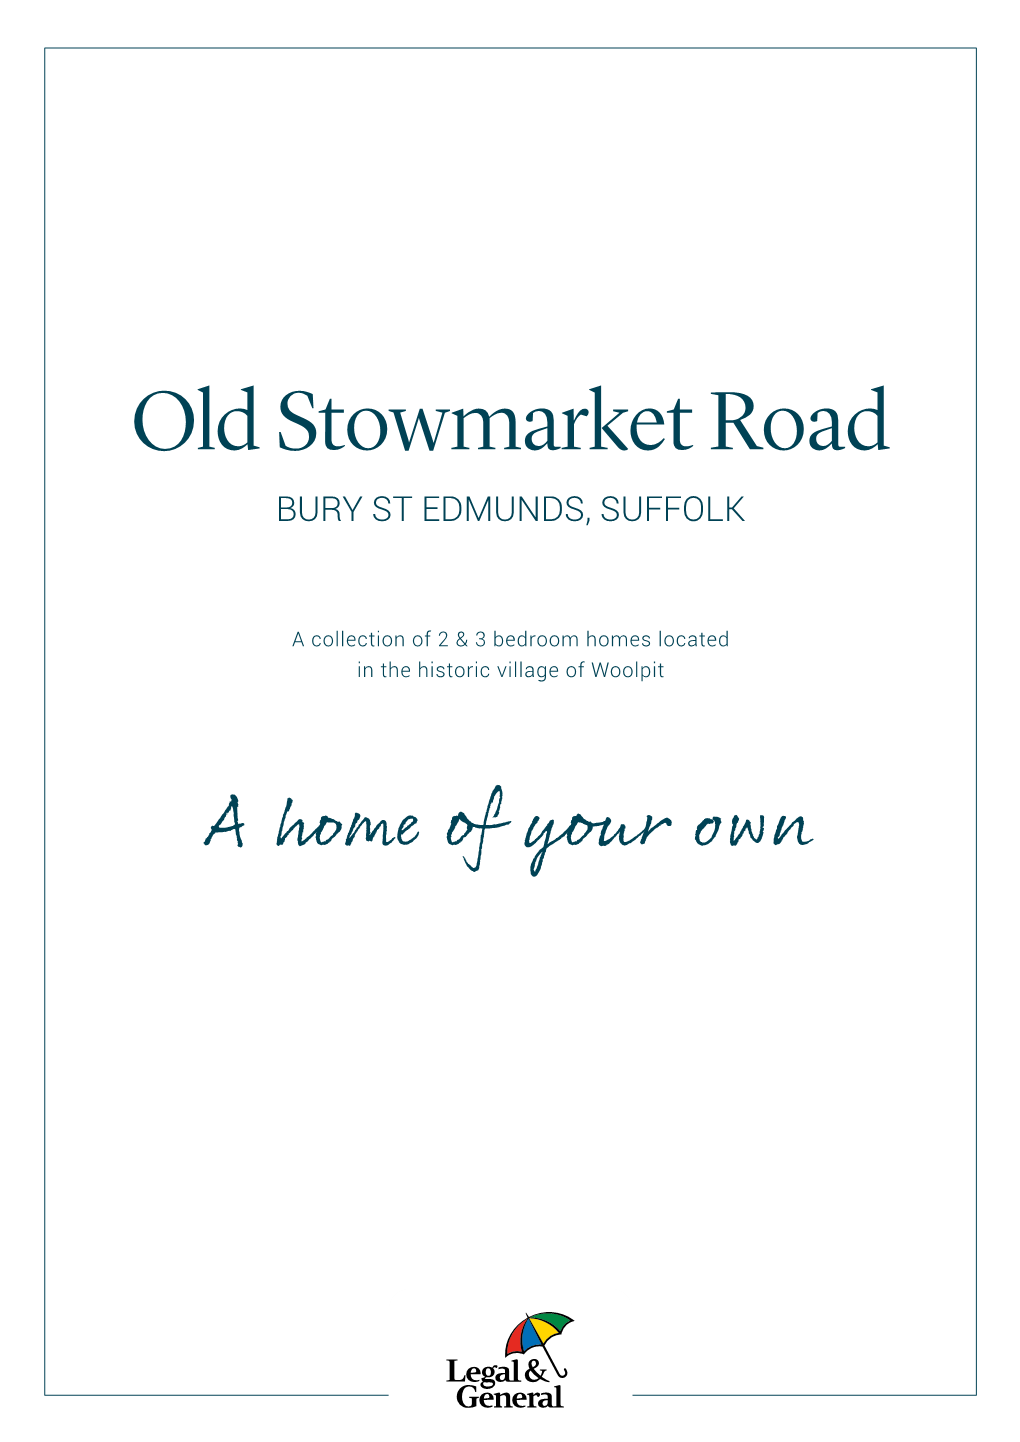 Brochure-Old-Stowmarket-Road-Woolpit-Legal-And-General-Affordable-Homes-Shared